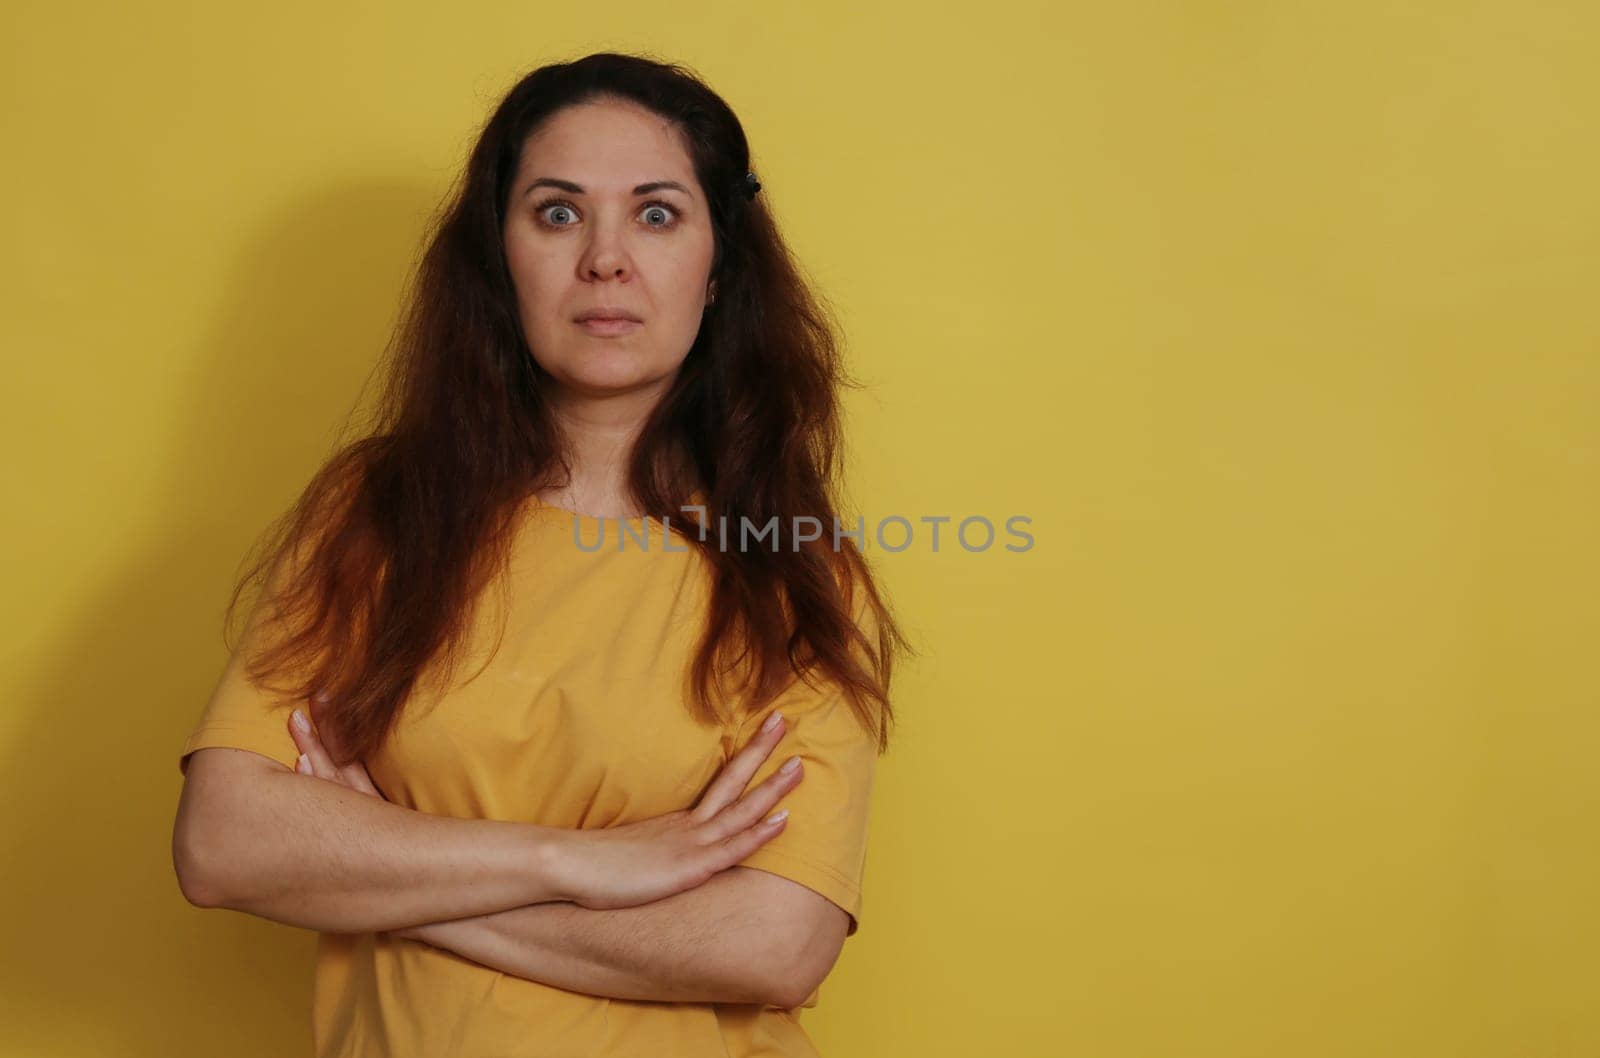 The beautiful brunette woman goggled her eyes out in surprise. Portrait of a surprised beautiful woman with the expectation of darkness in a yellow tank top on a yellow background.